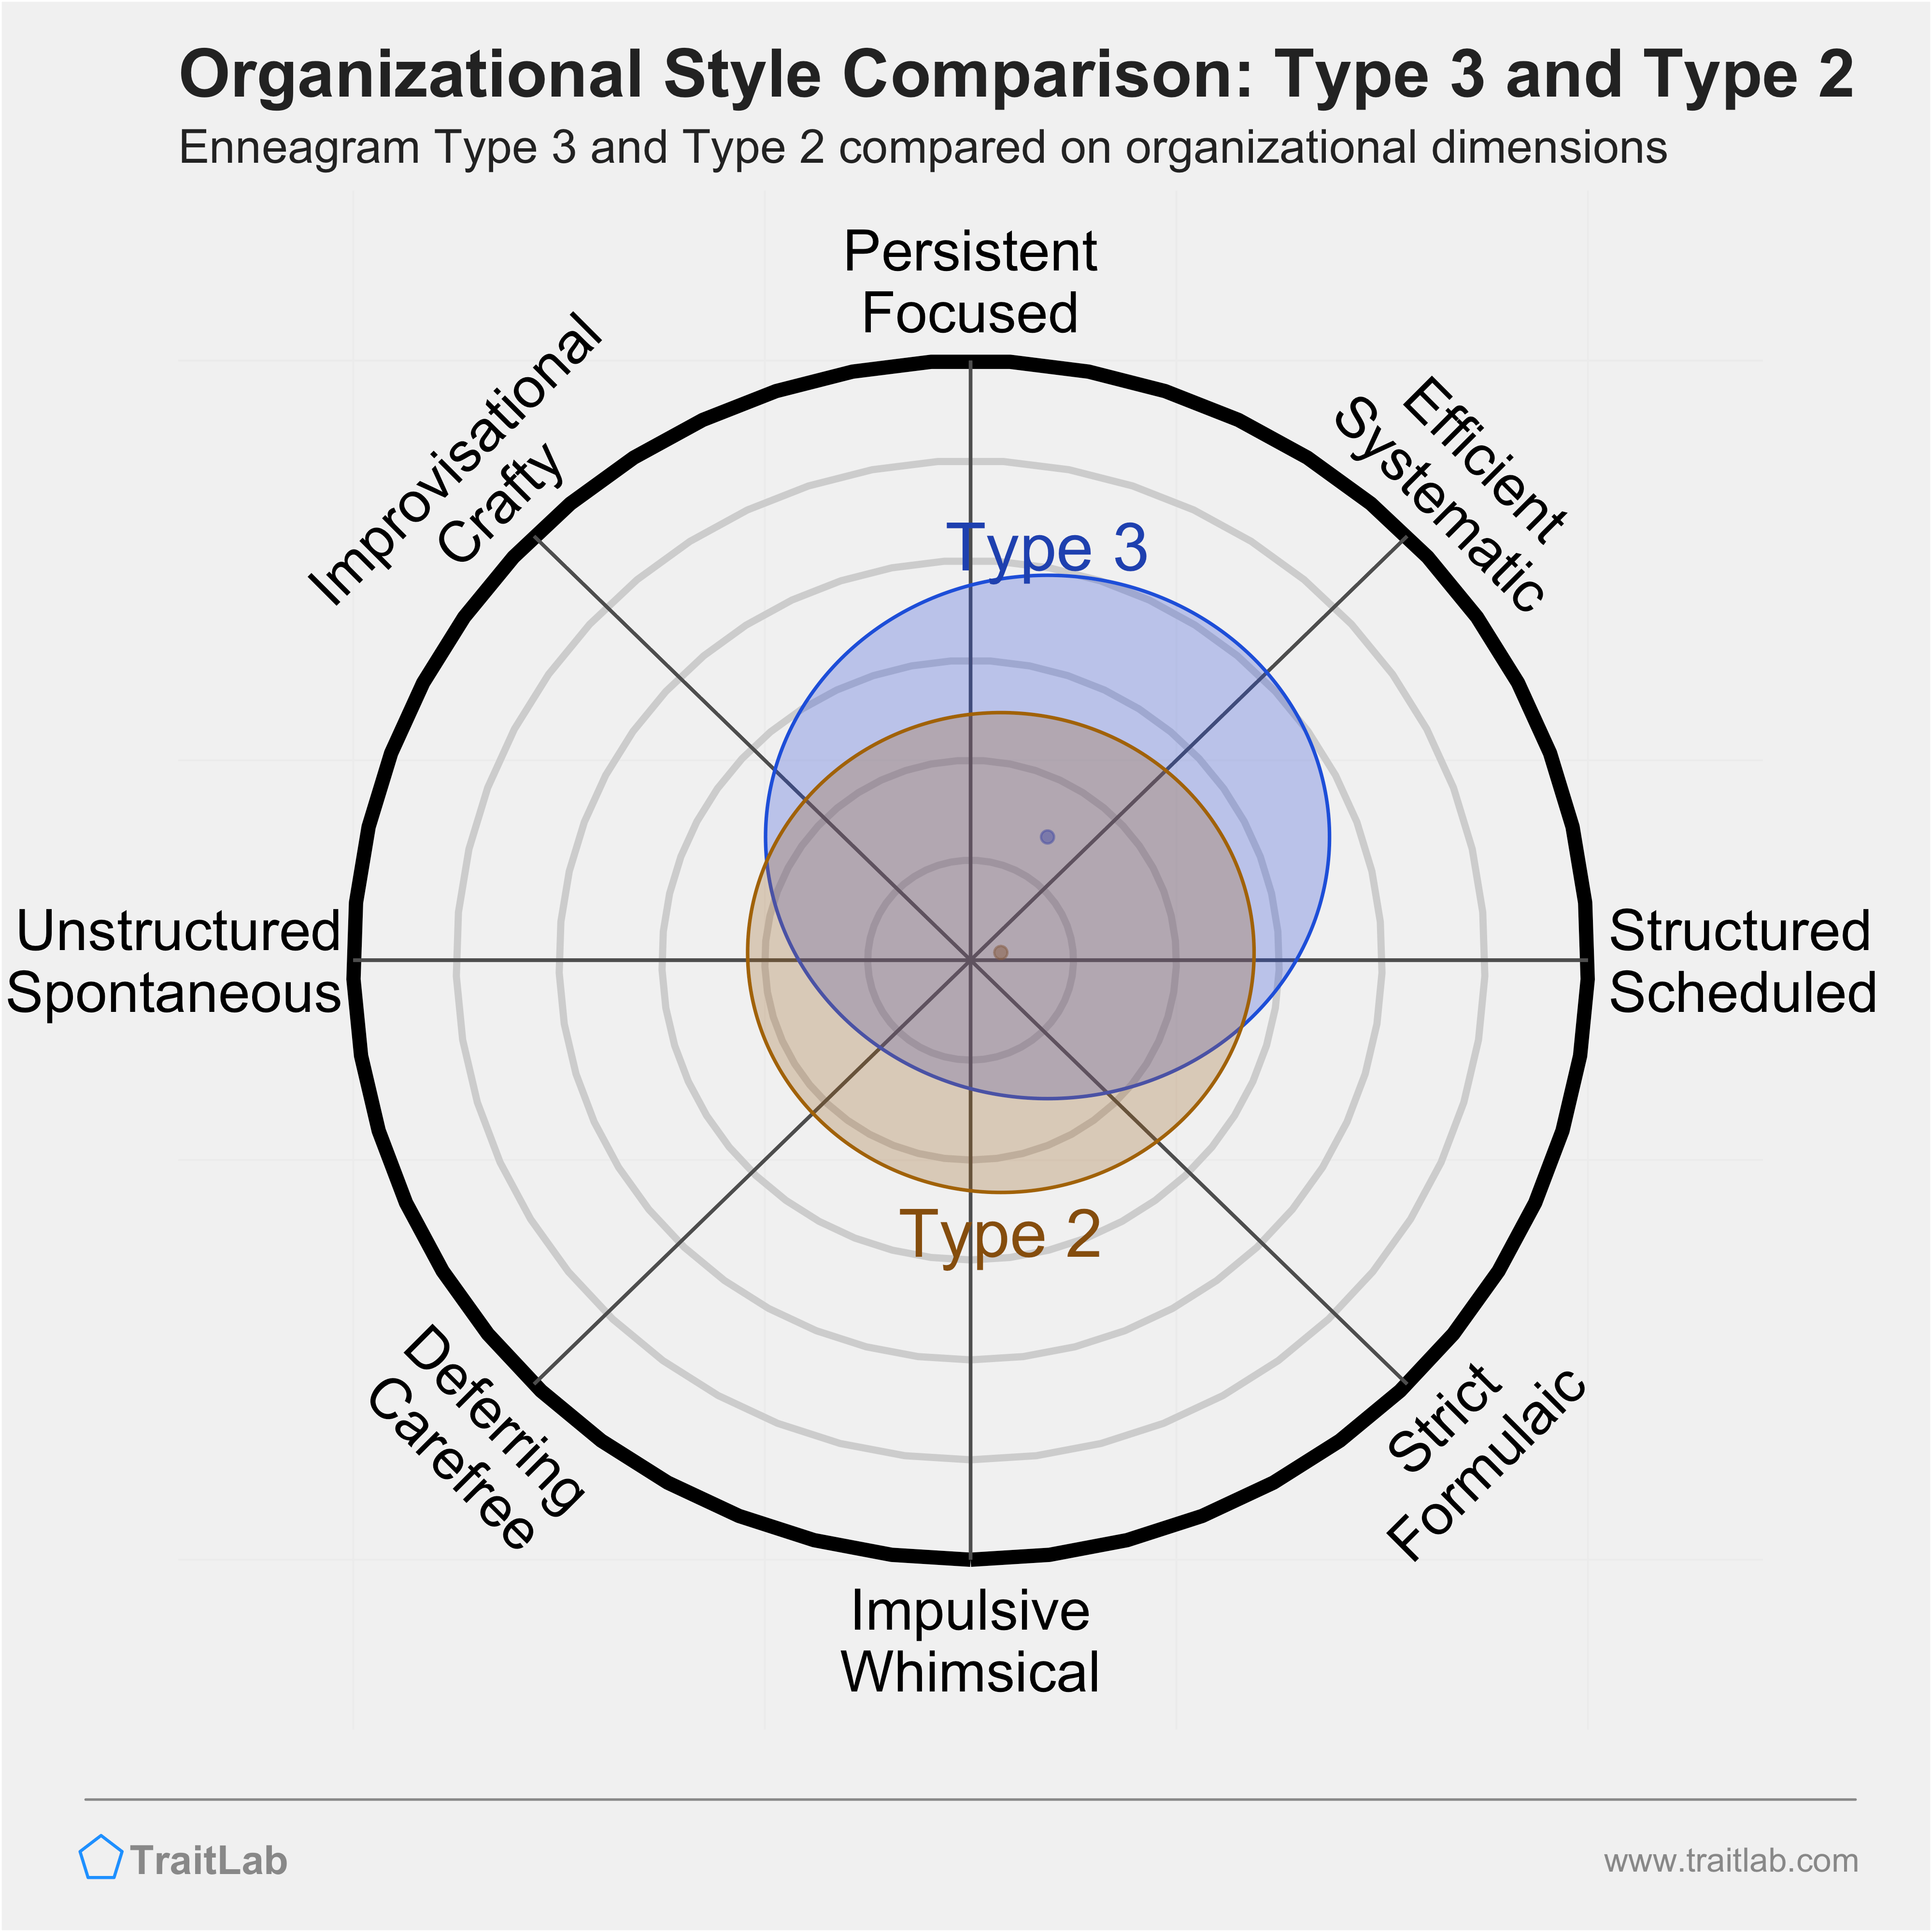 Type 3 and Type 2 comparison across organizational dimensions